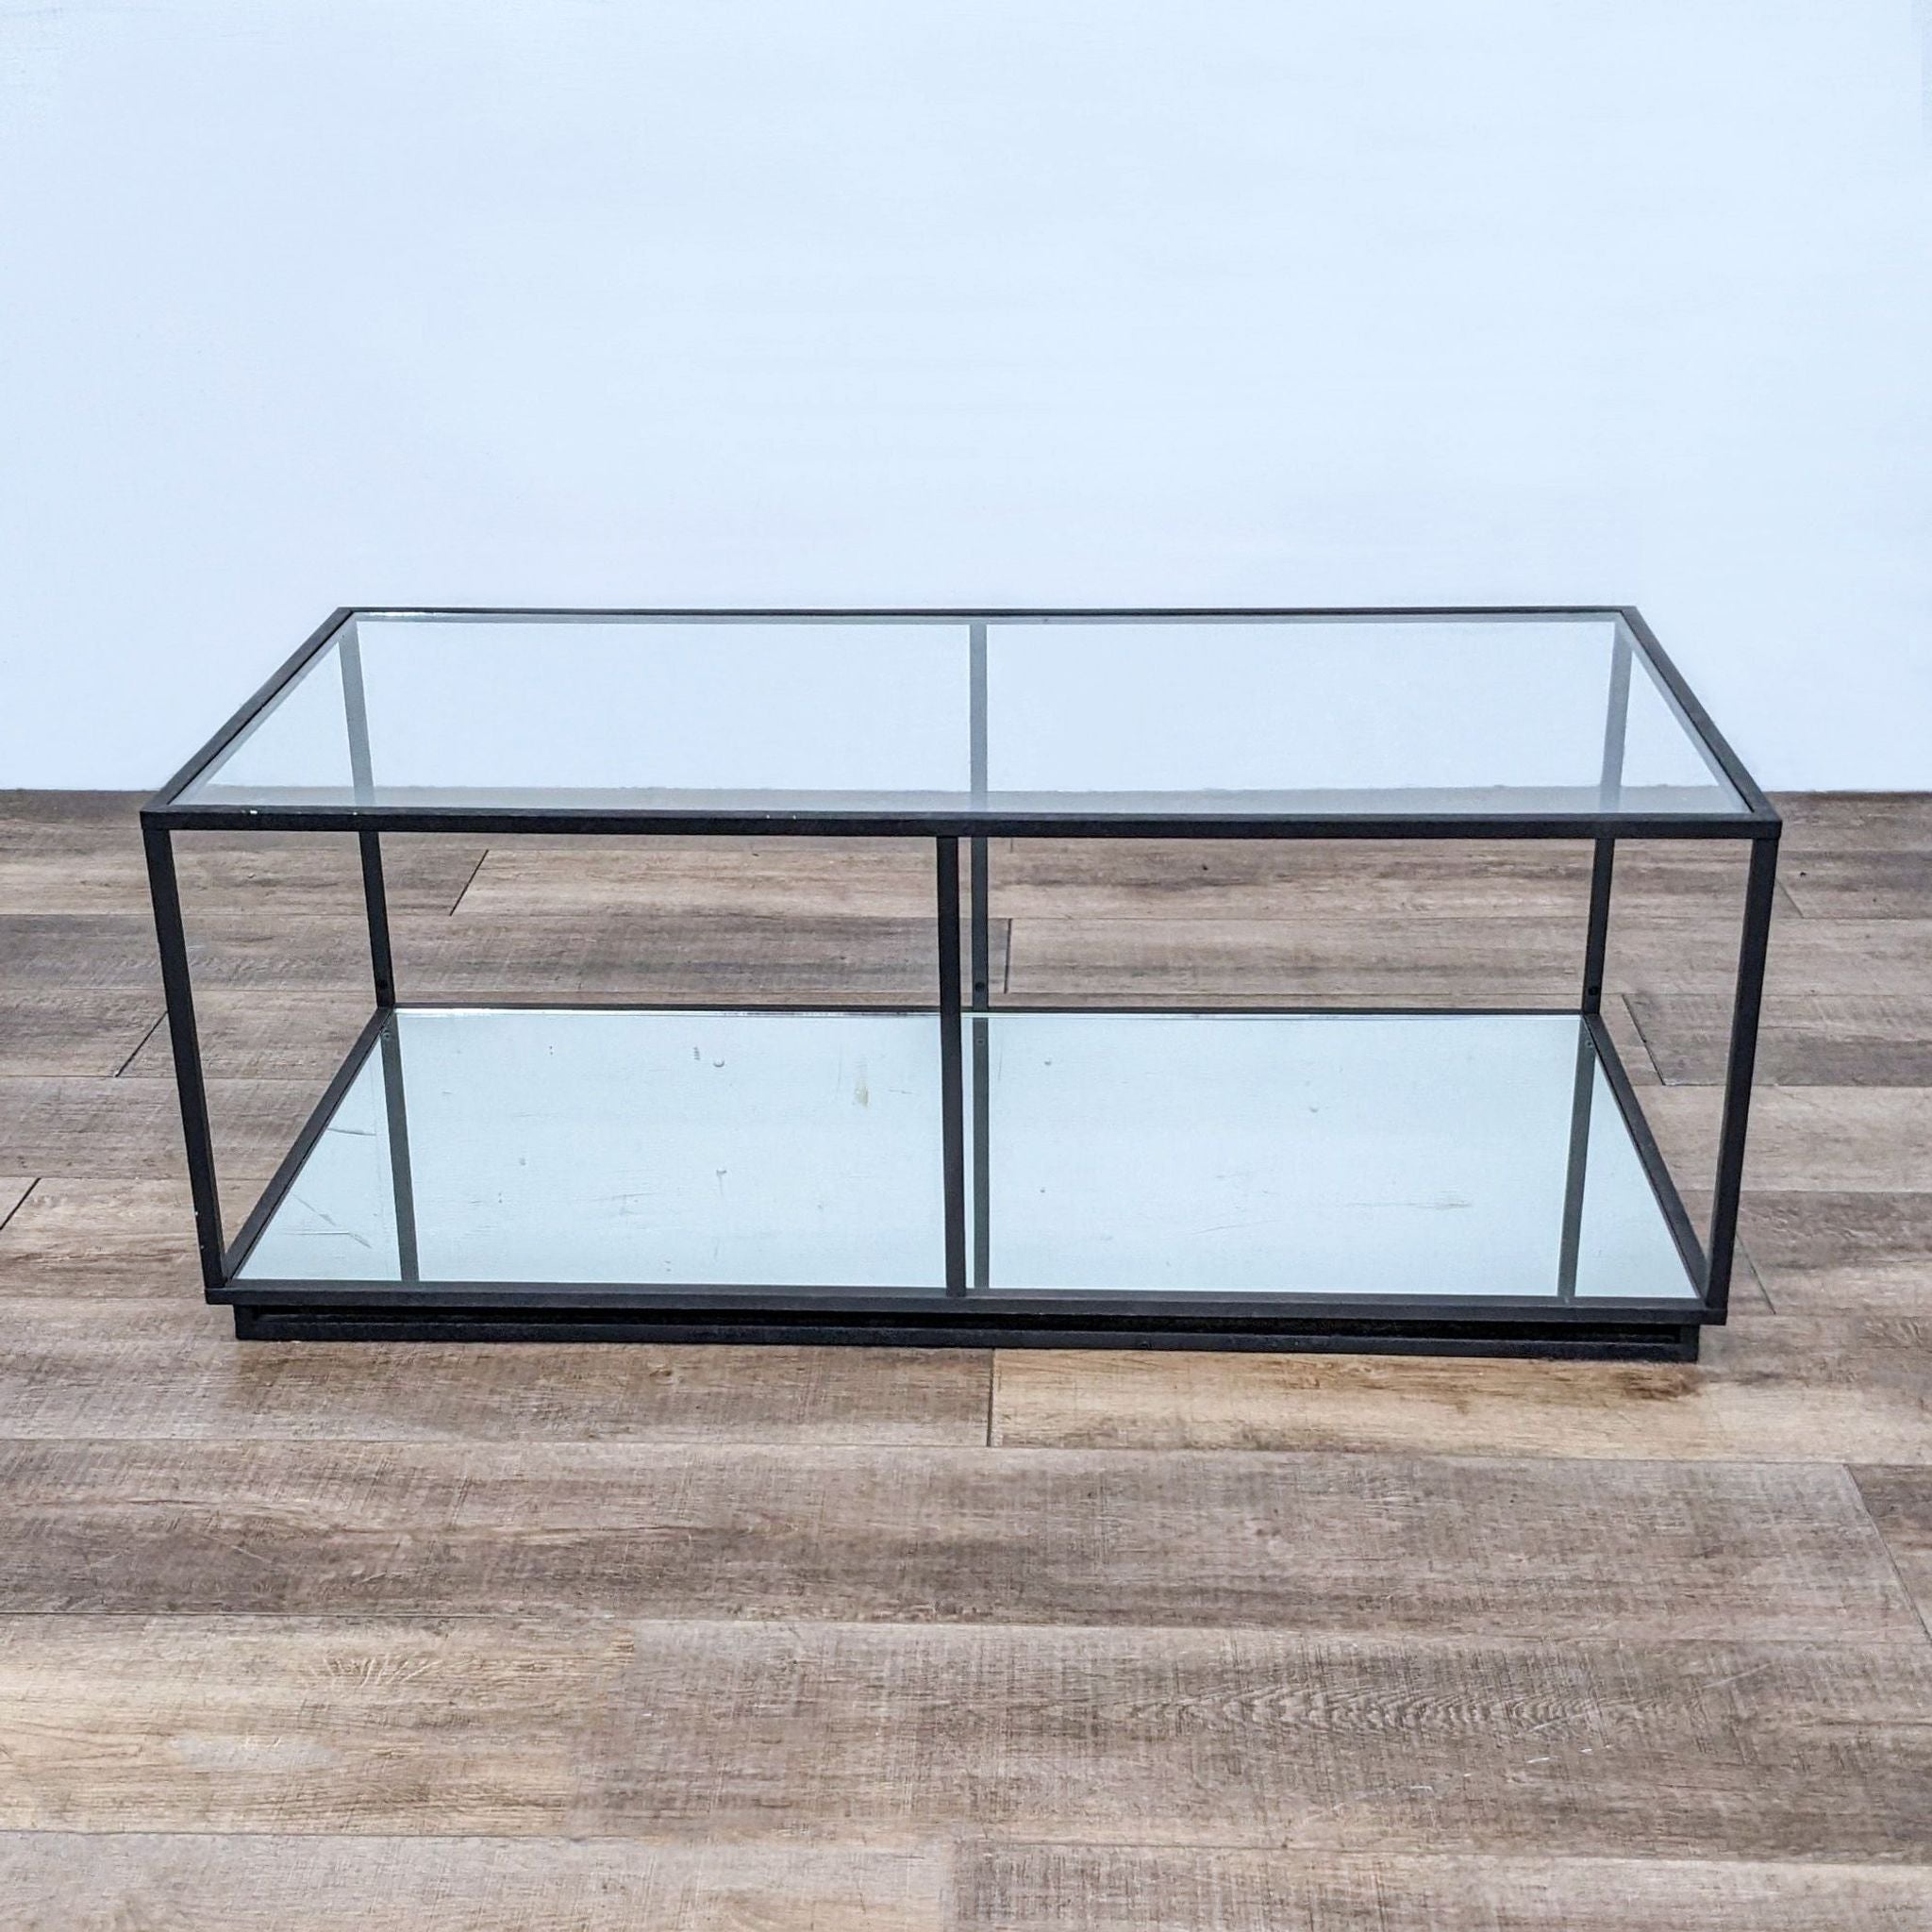 Sleek Reperch coffee table with metallic frame and clear glass surfaces, against a wood-patterned backdrop.